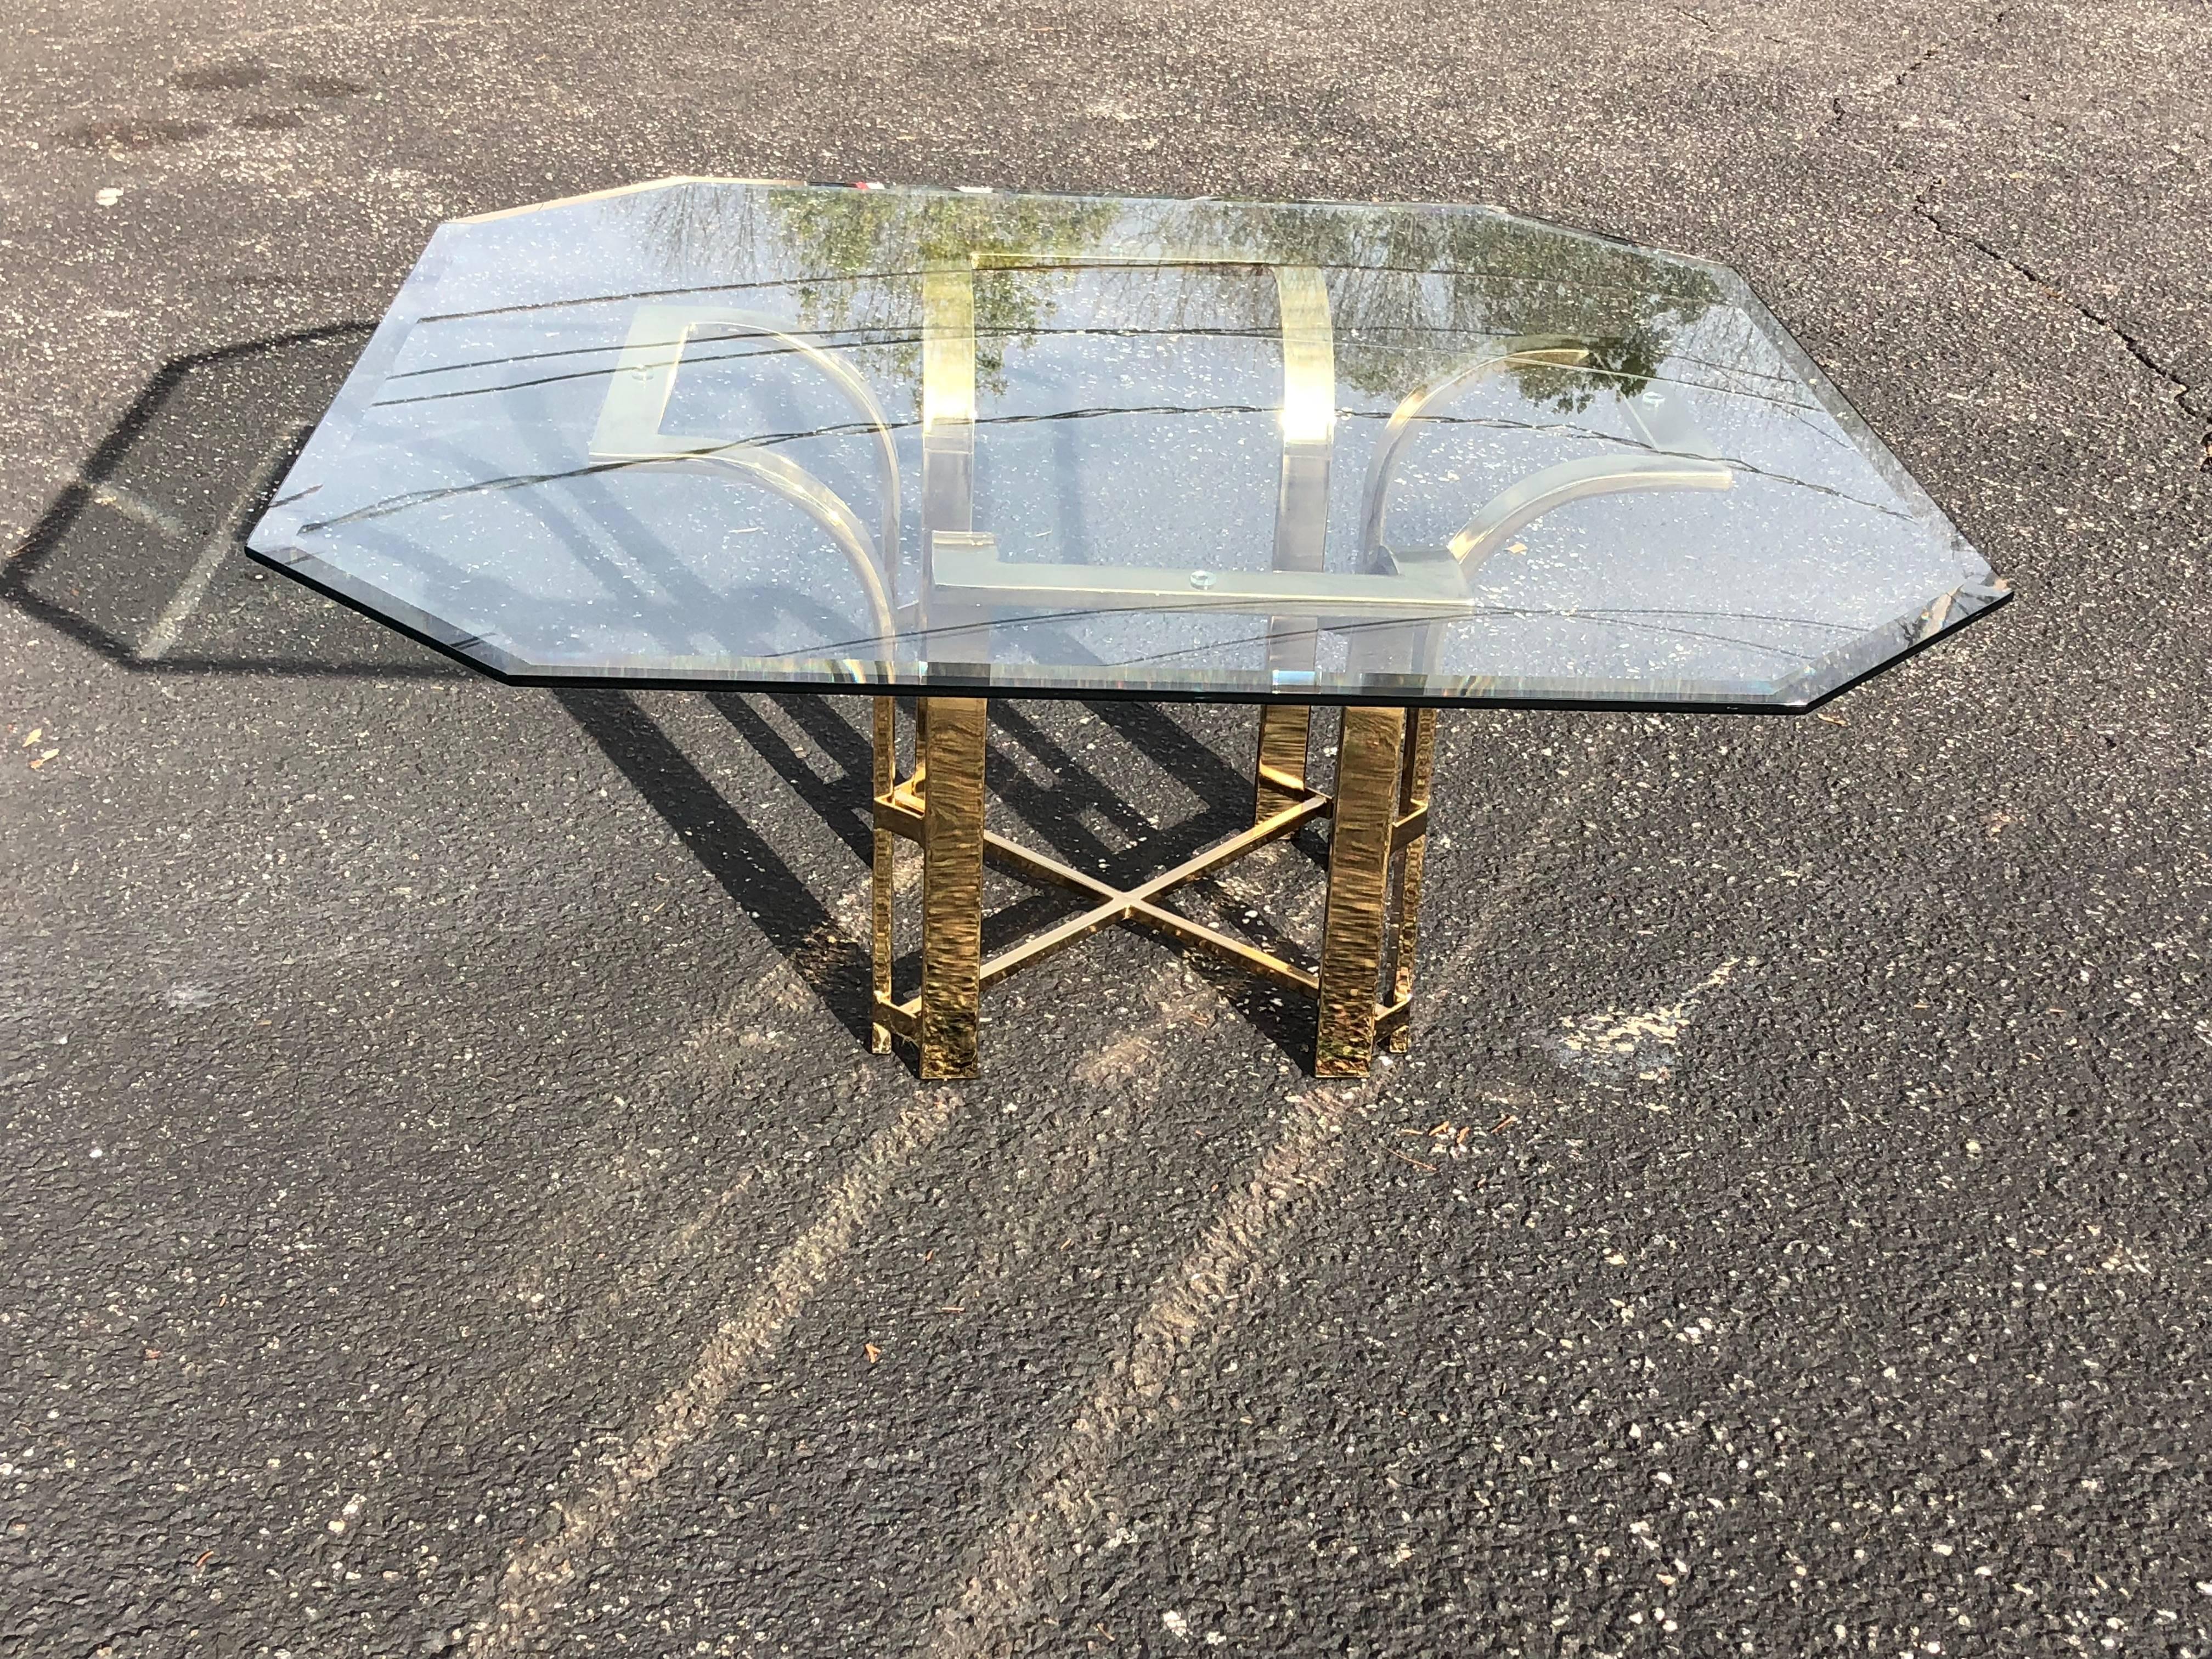 Hollywood Regency brass and glass coffee table. Stunning Octagonal glass top with one inch beveled glass.  The glass top is 39